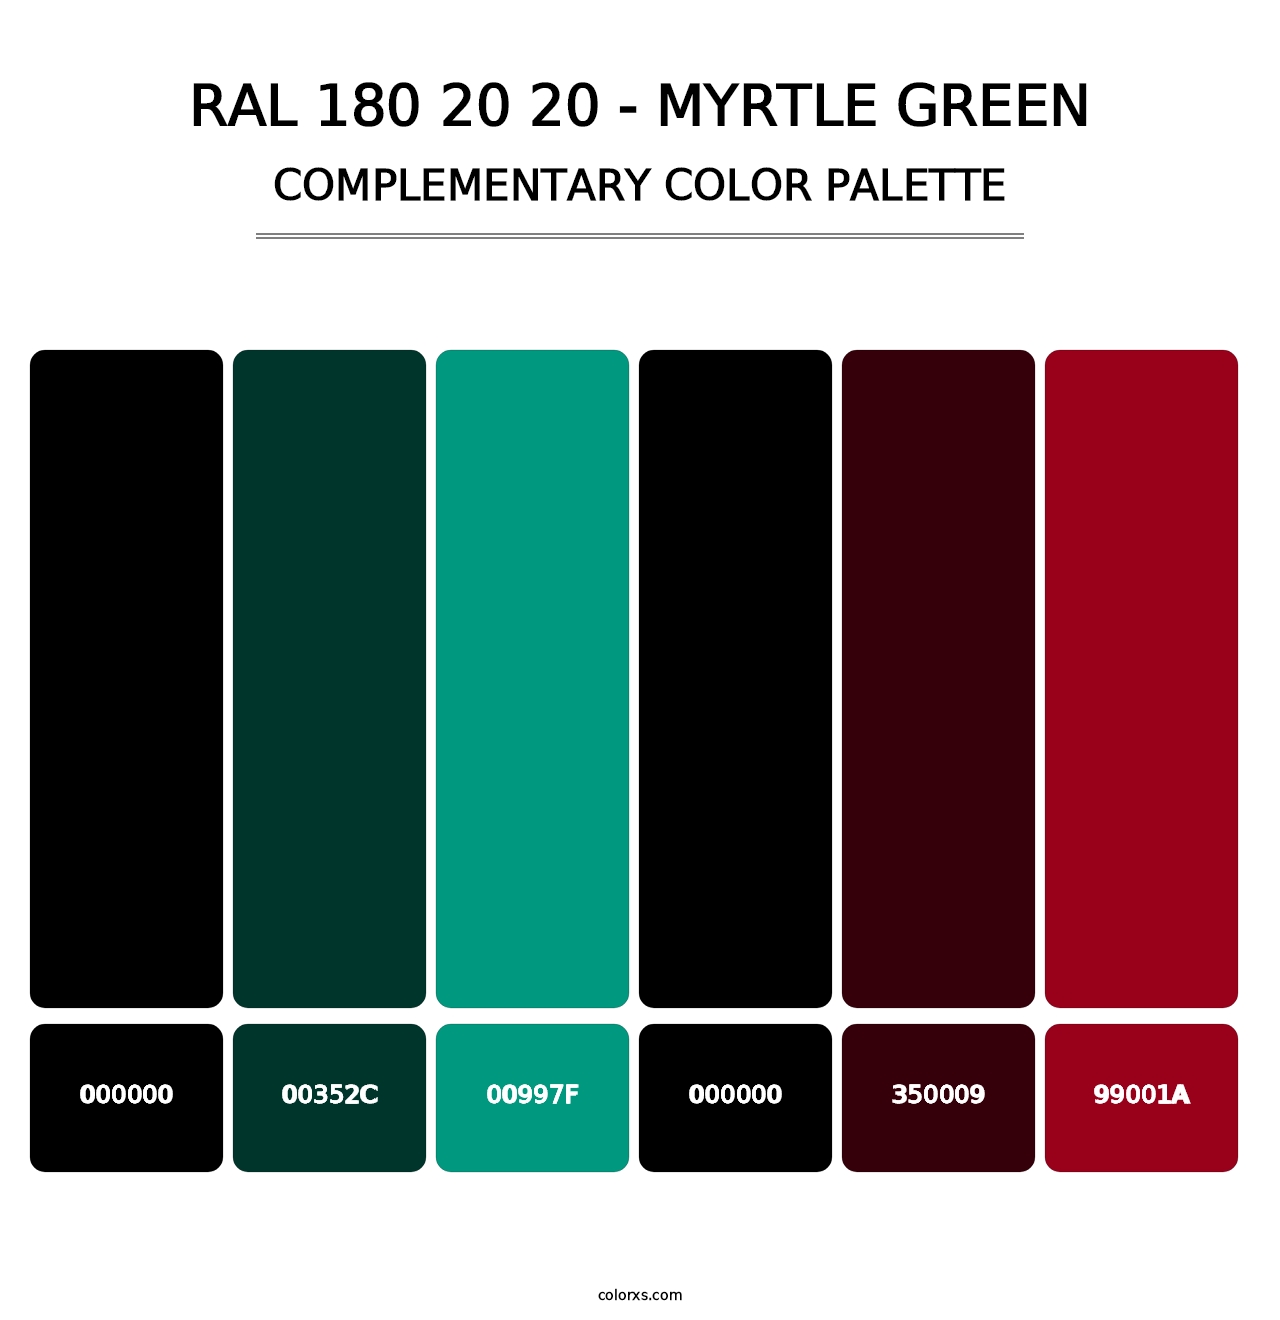 RAL 180 20 20 - Myrtle Green - Complementary Color Palette